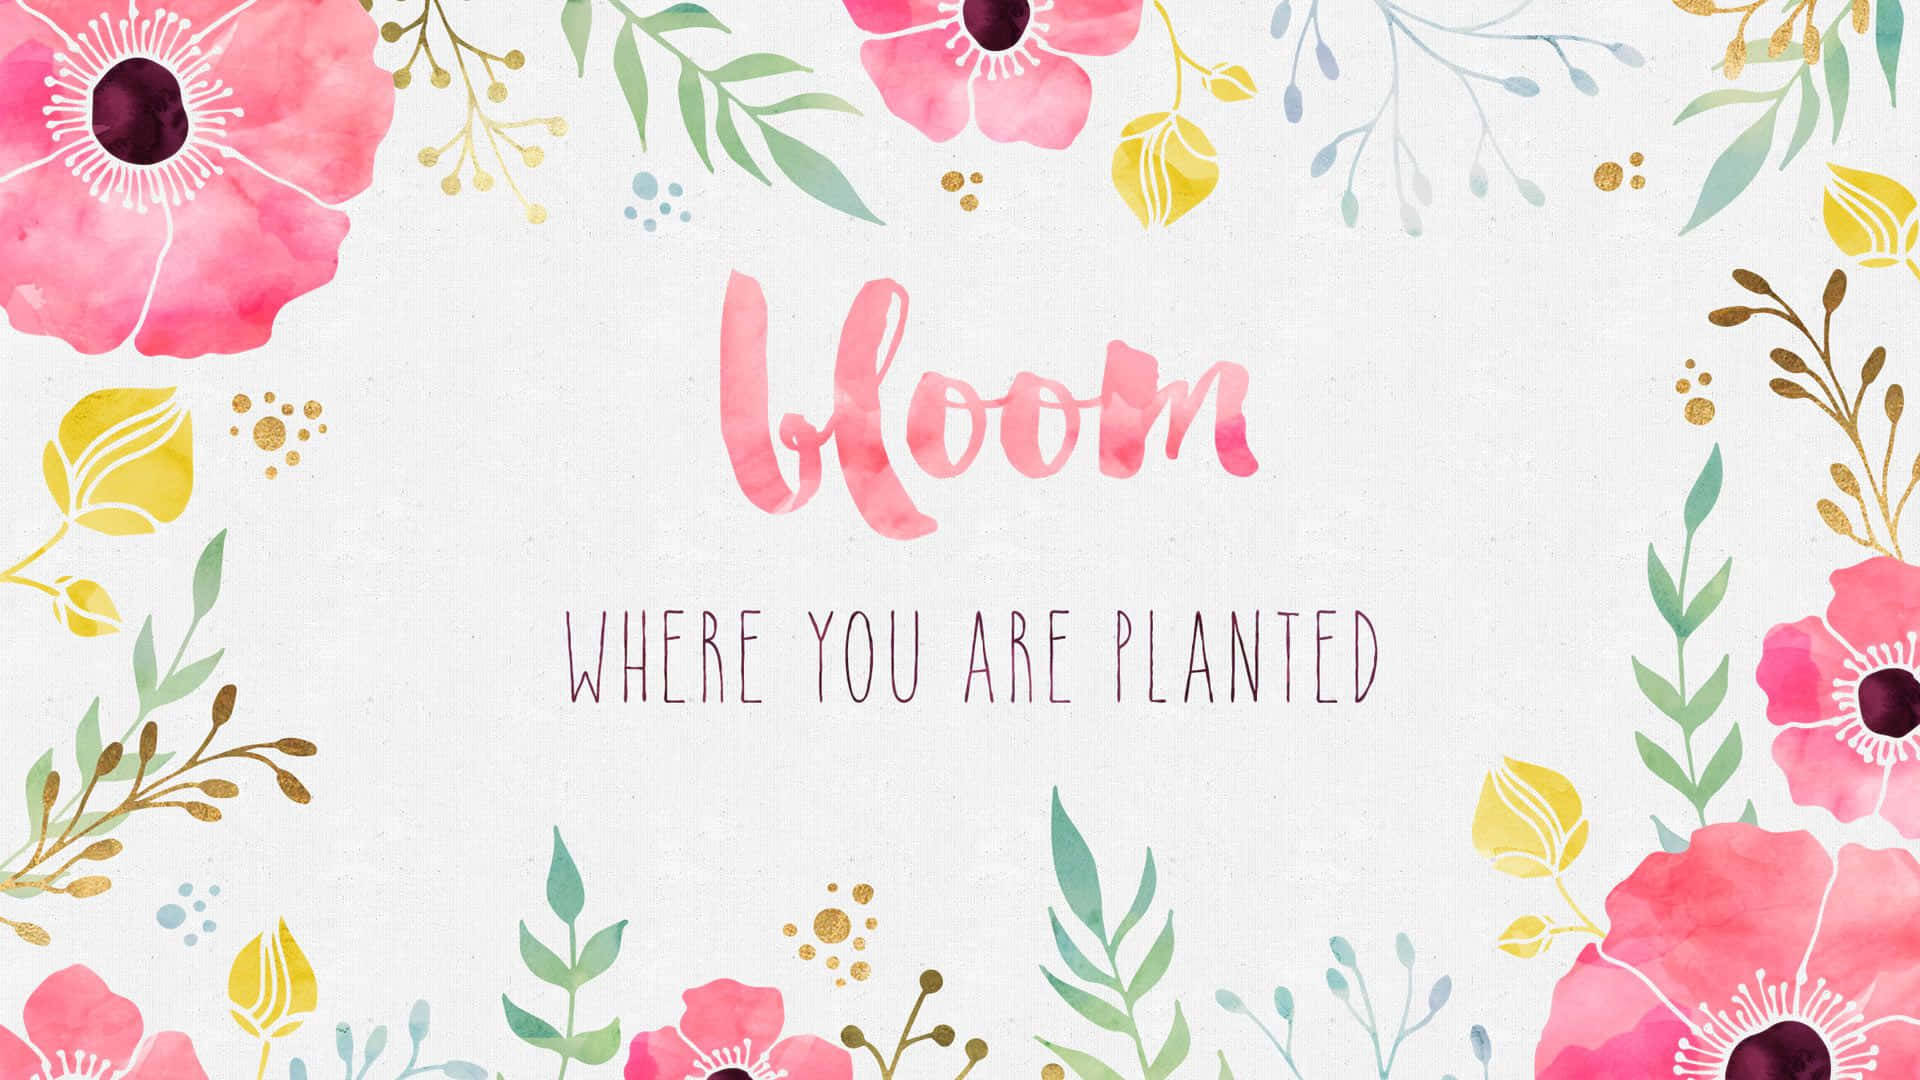 A Watercolor Floral Background With The Words Bloom Where You Are Planted Background